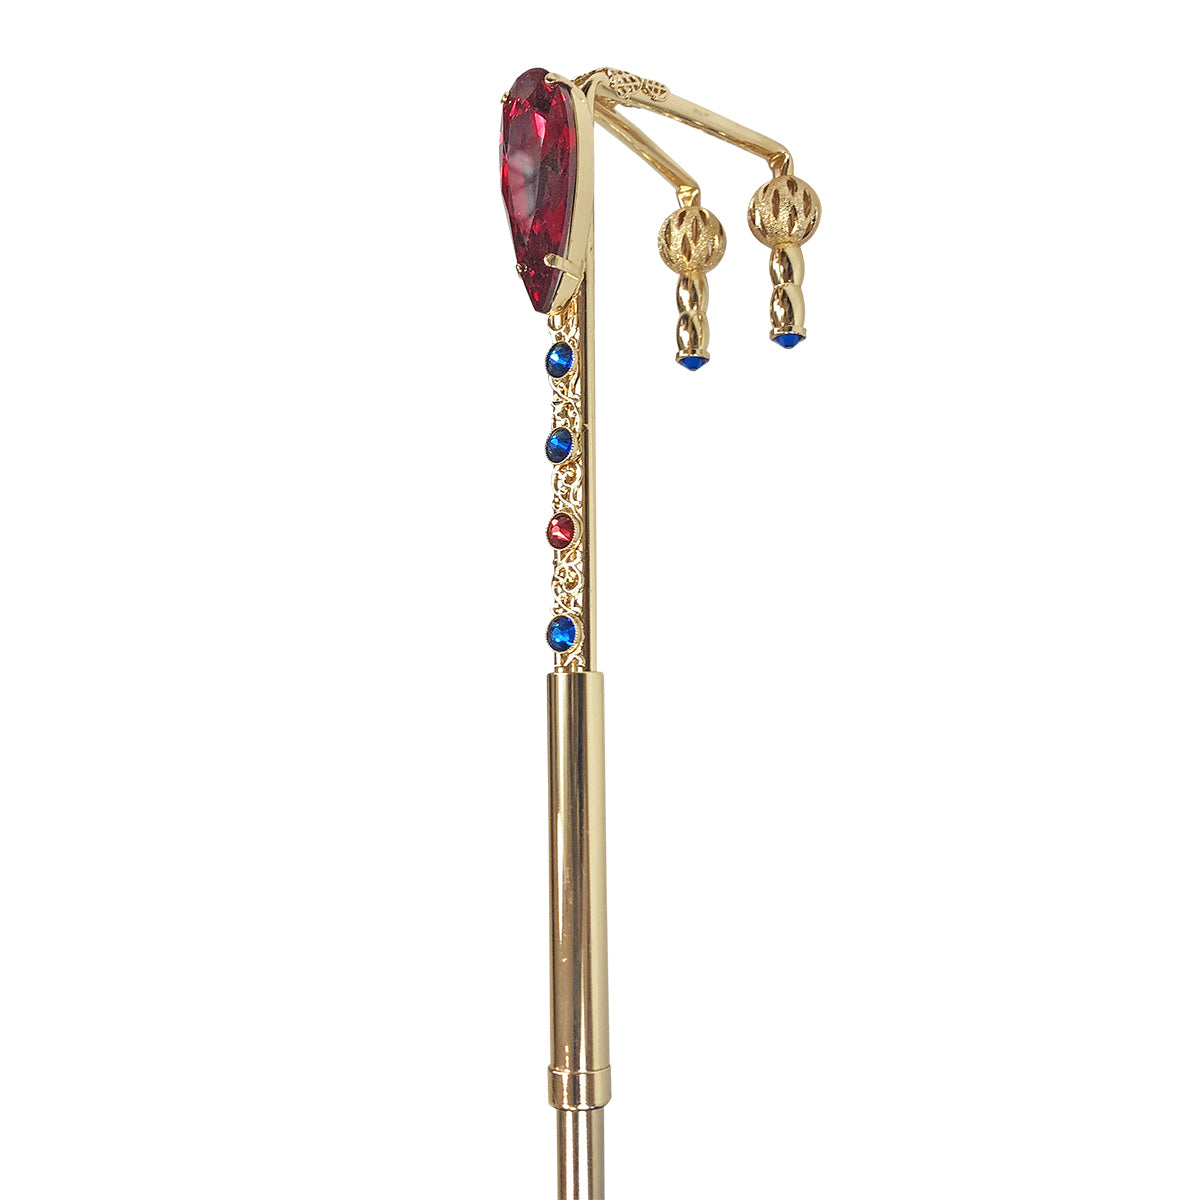 Beautiful umbrella with gold-plated handle and big red crystal